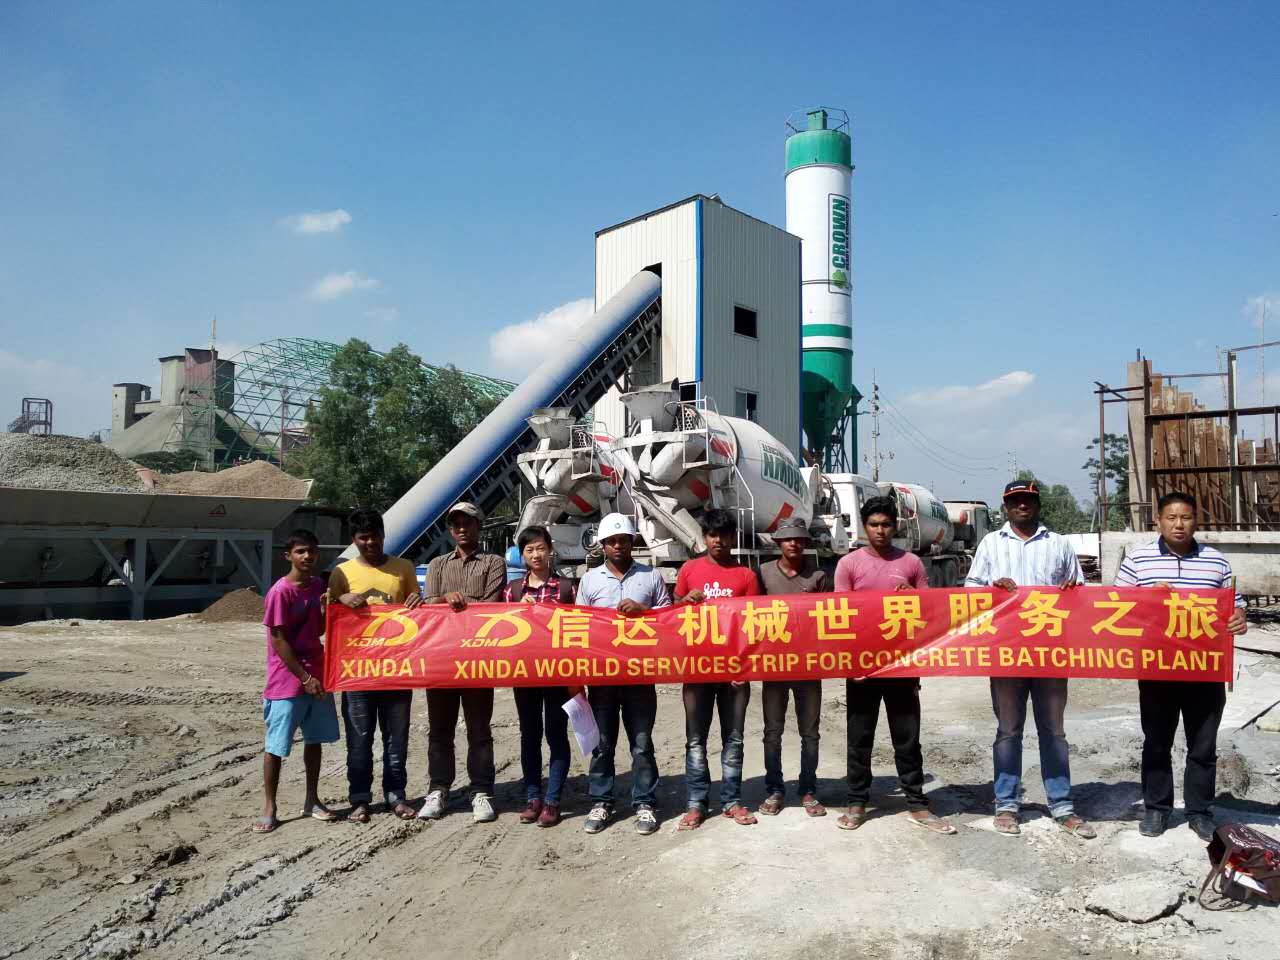 XINDA WORLD SERVICES TRIP FOR CONCRETE BATCHING PLANT